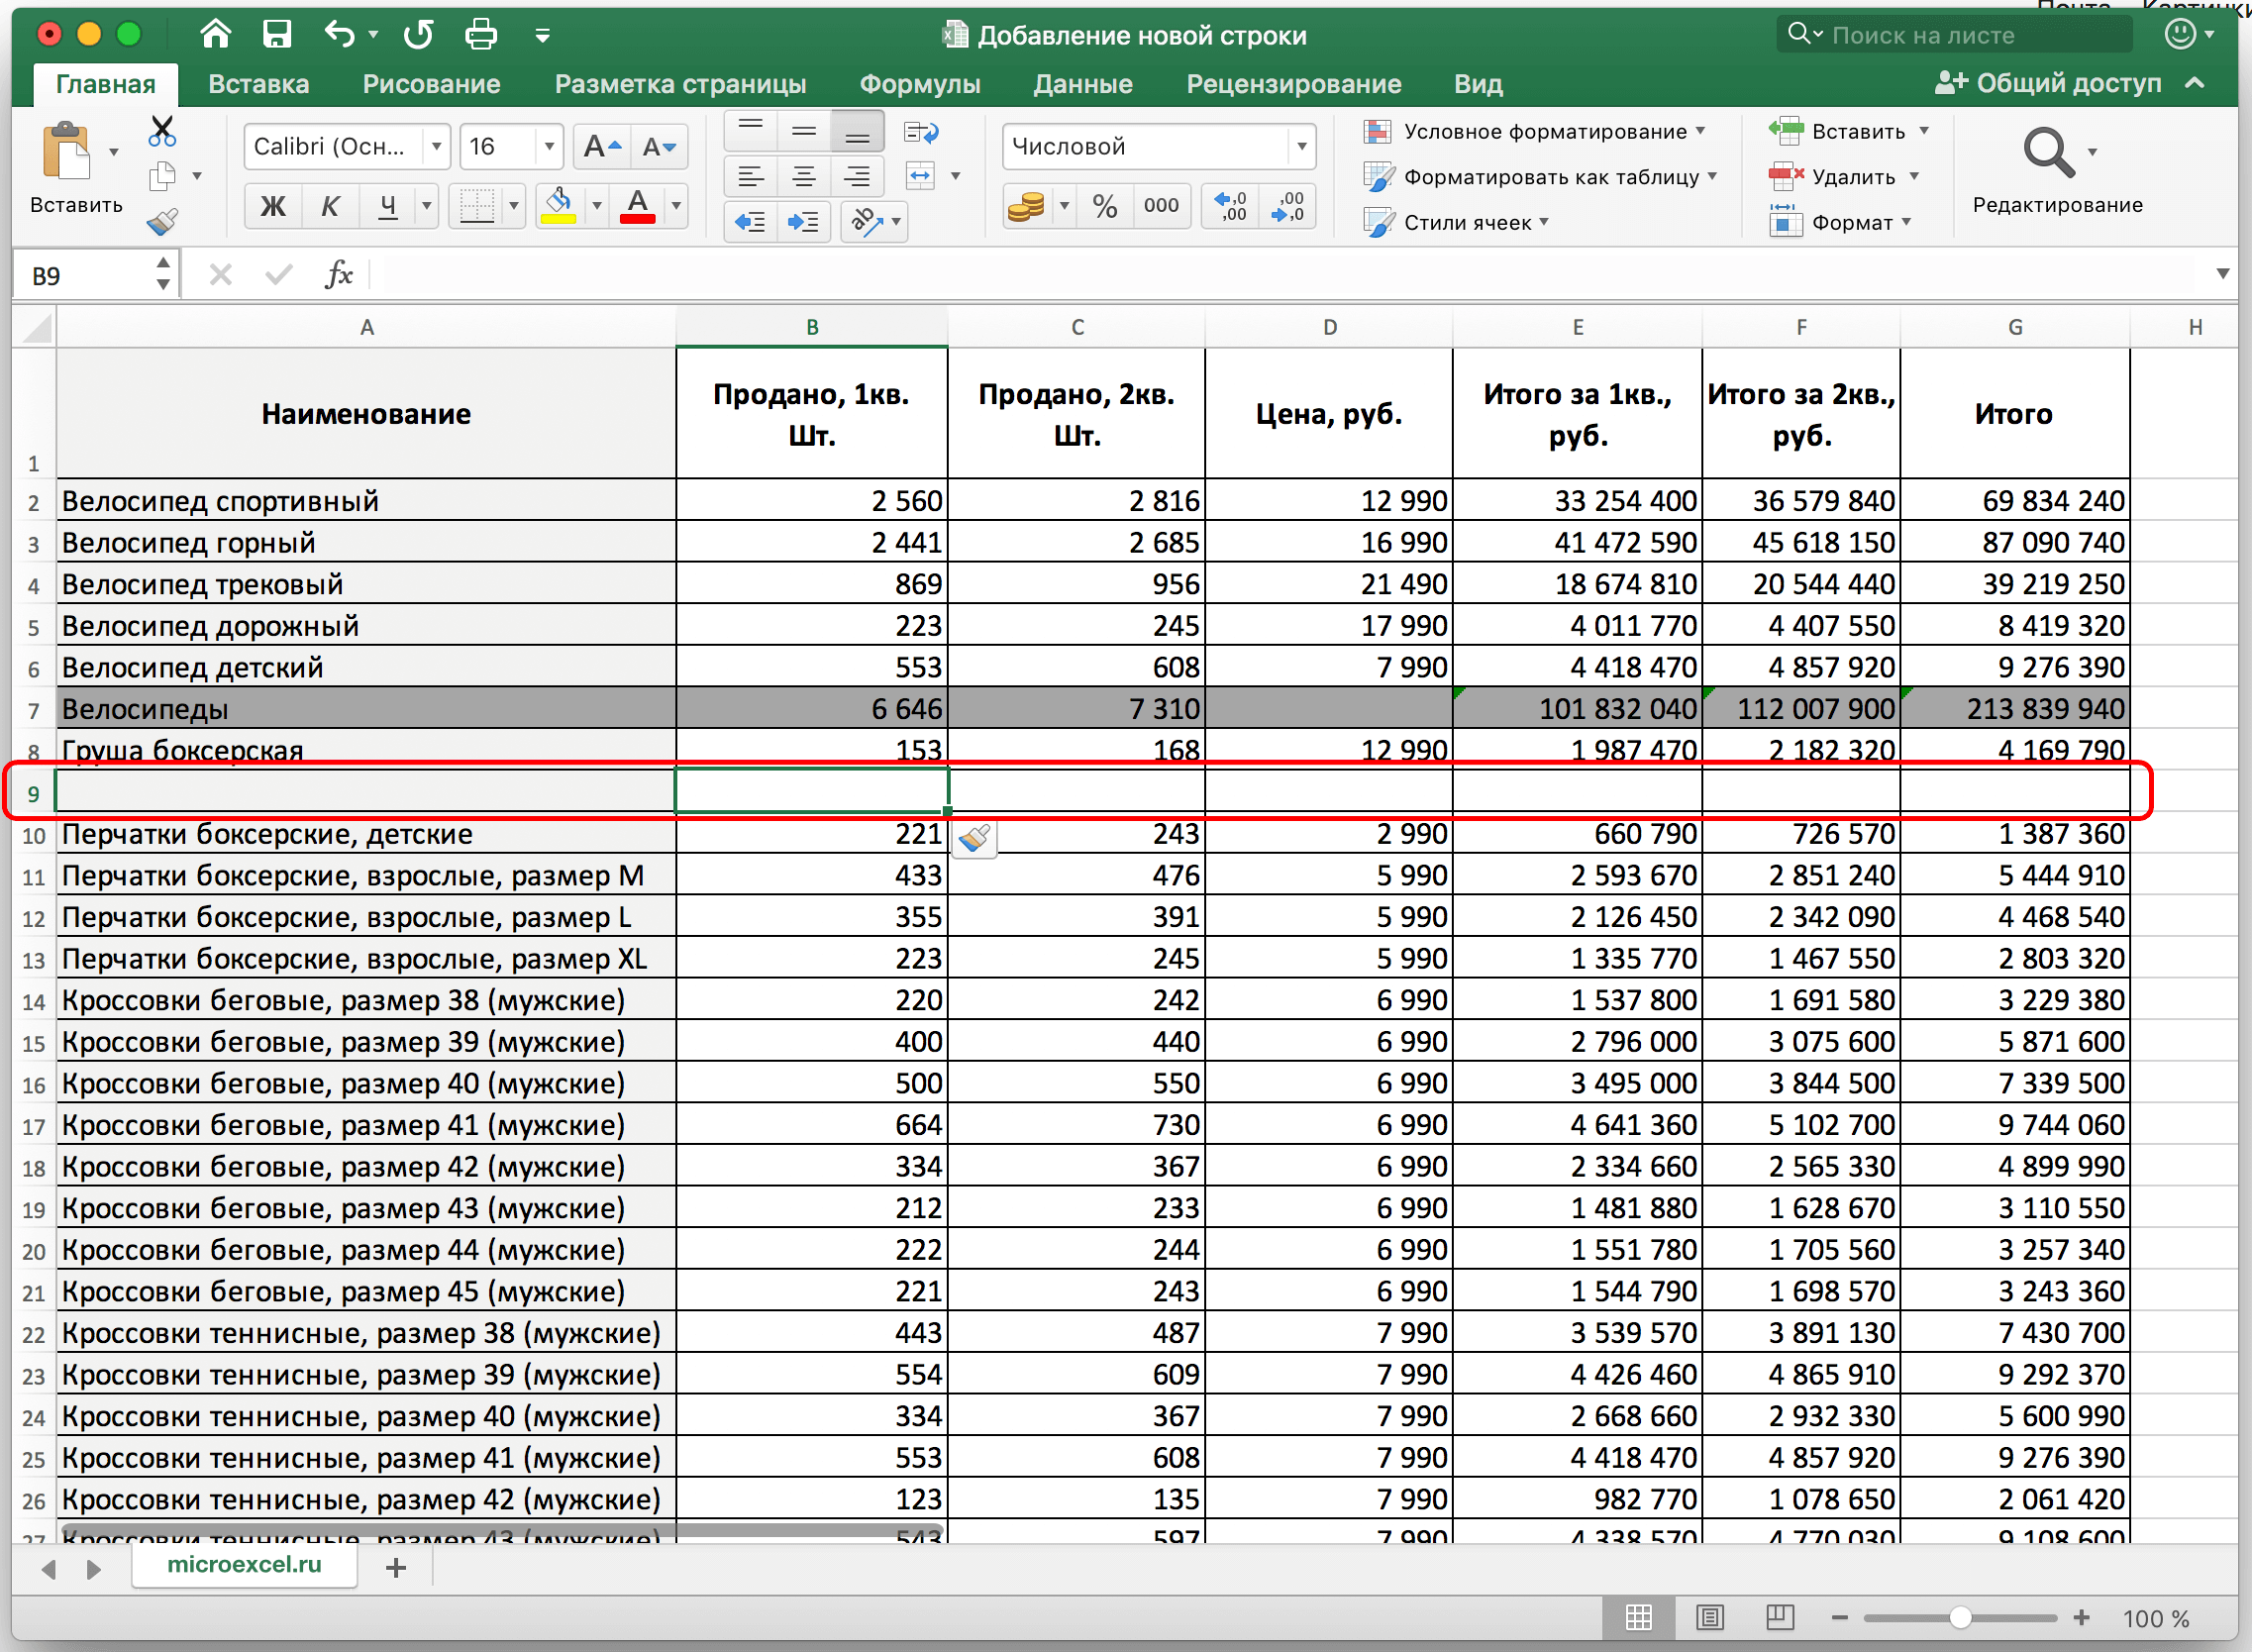 How to add a new row in excel. Inside and at the end of the table, in the smart table